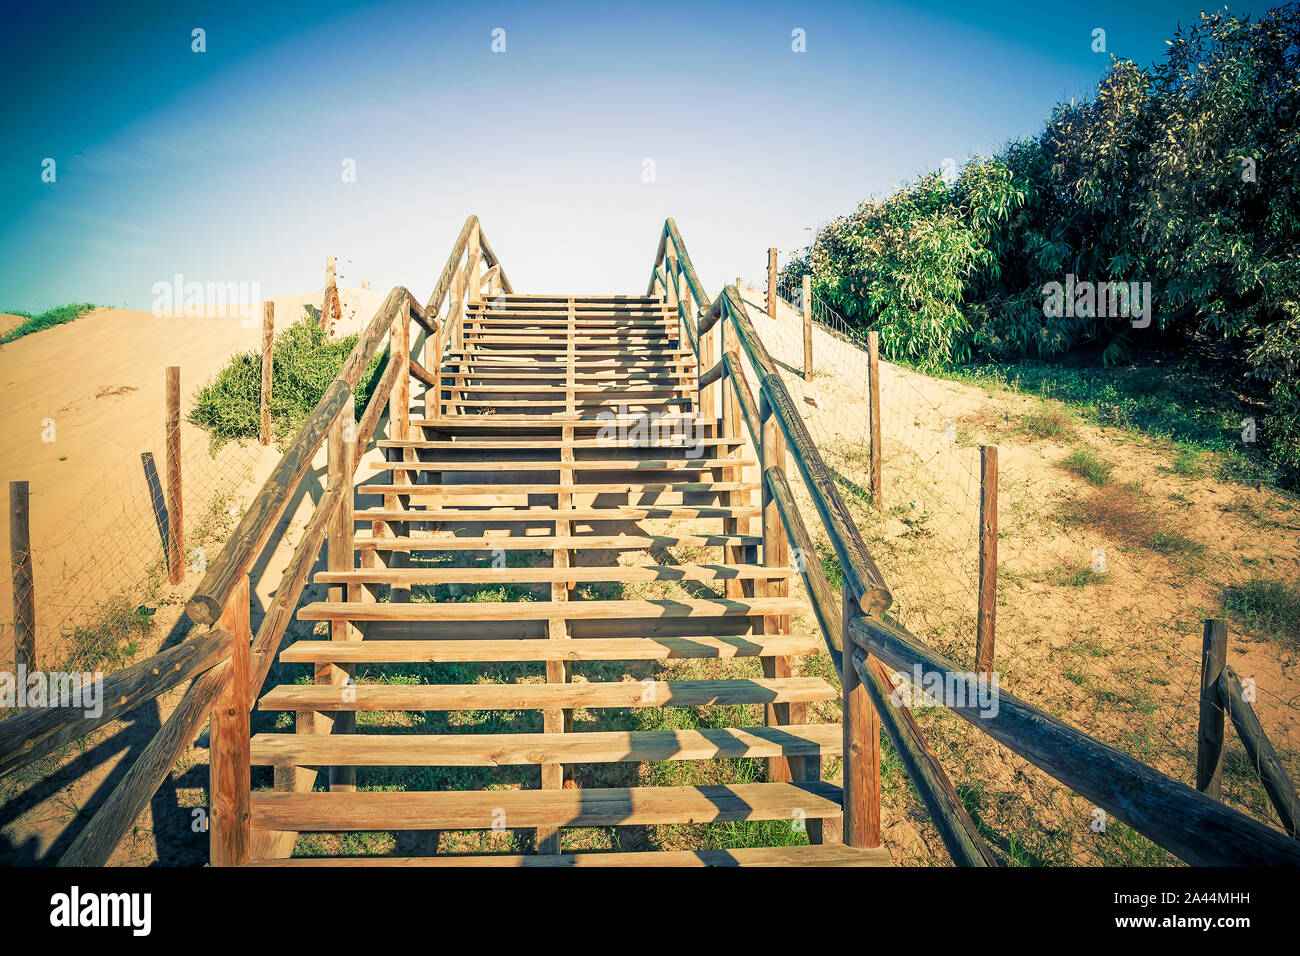 view of wooden stairs with railings heading towards the blue sky Stock Photo